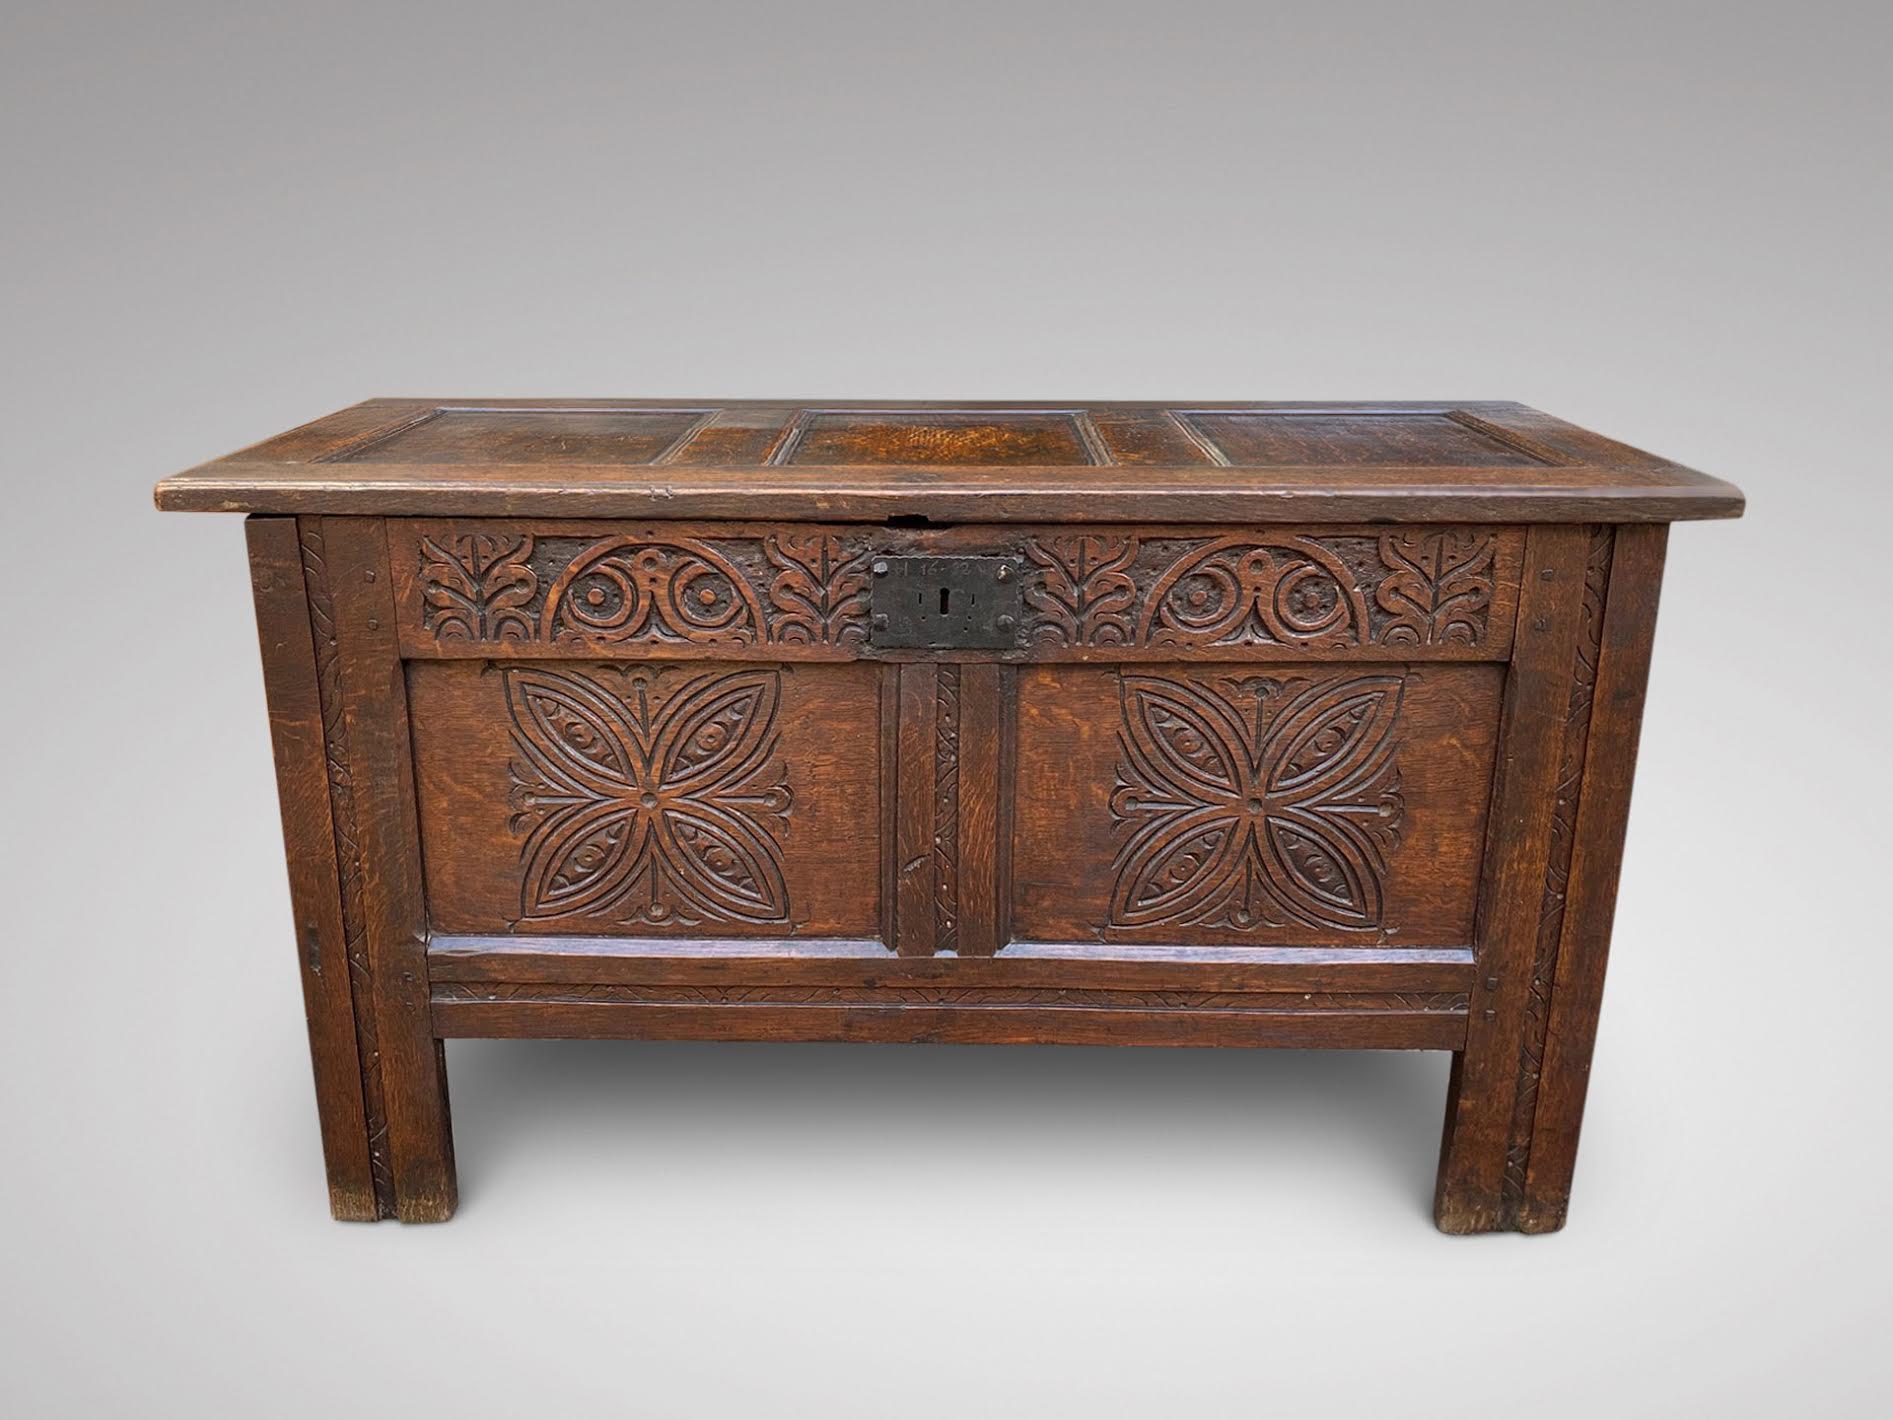 A small early 18th Century oak antique coffer, trunk, chest. The single plank rectangular top with above a carved frieze with two lozenge carved panels with further carved detail to the stiles, having planked ends and of lovely colour and